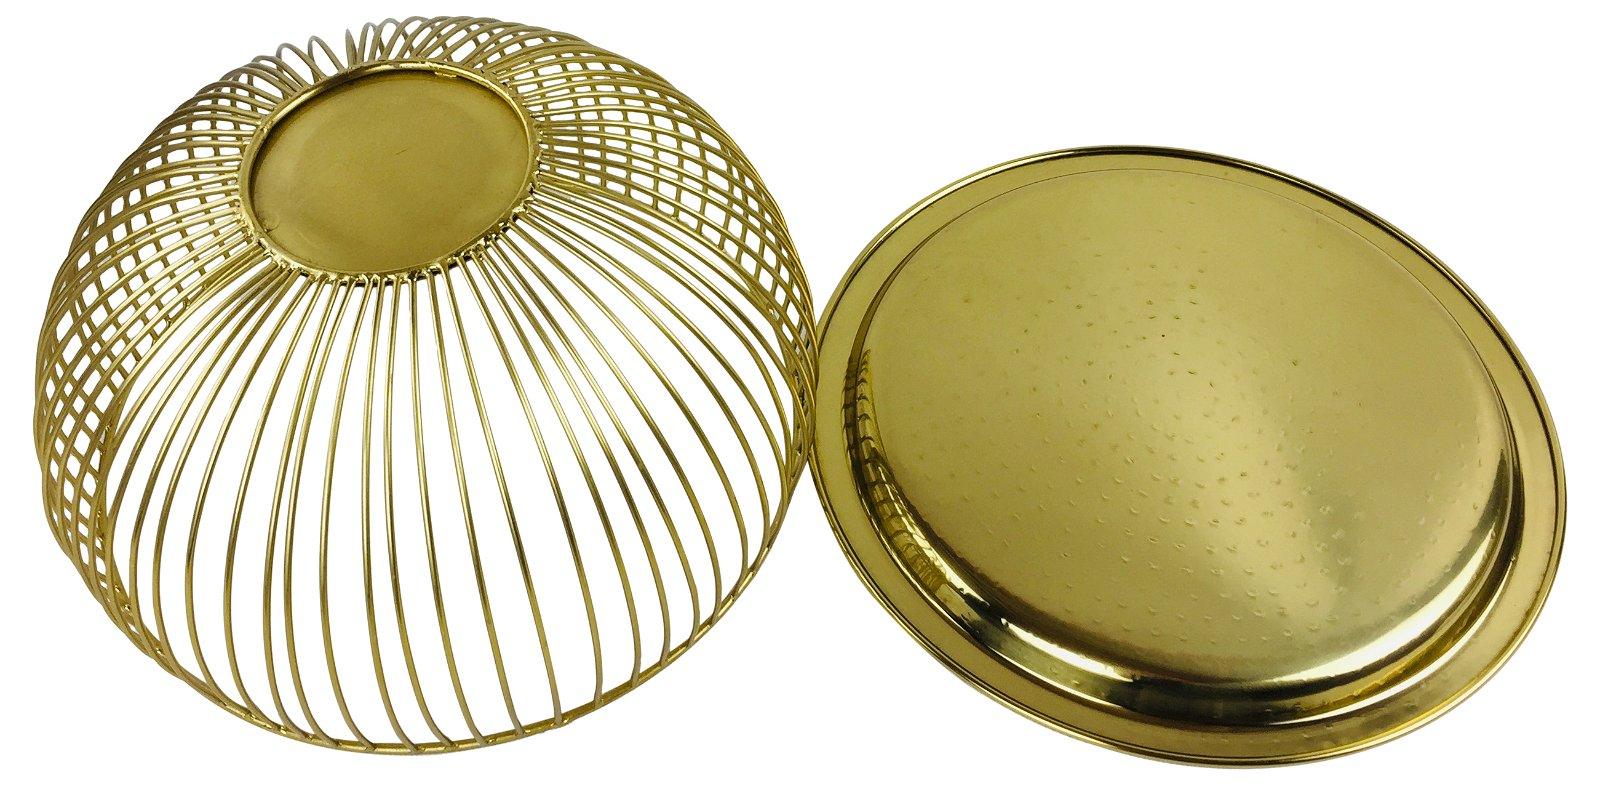 Set Of 3 Gold Bowls With Plate Tops-Decorative Kitchen Items